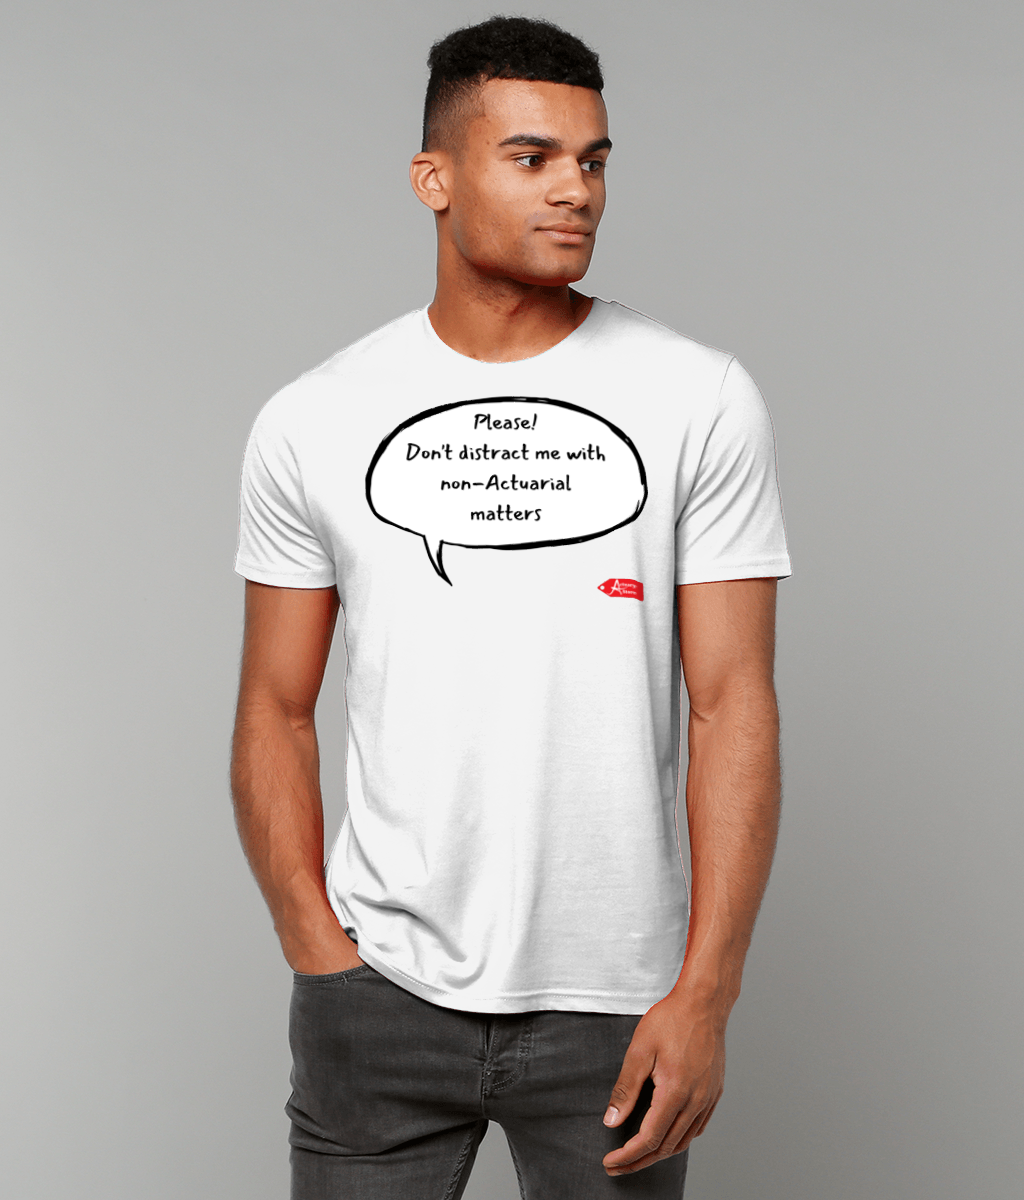 Please Don't Distract Me With Non-Actuarial Matters White T-Shirt